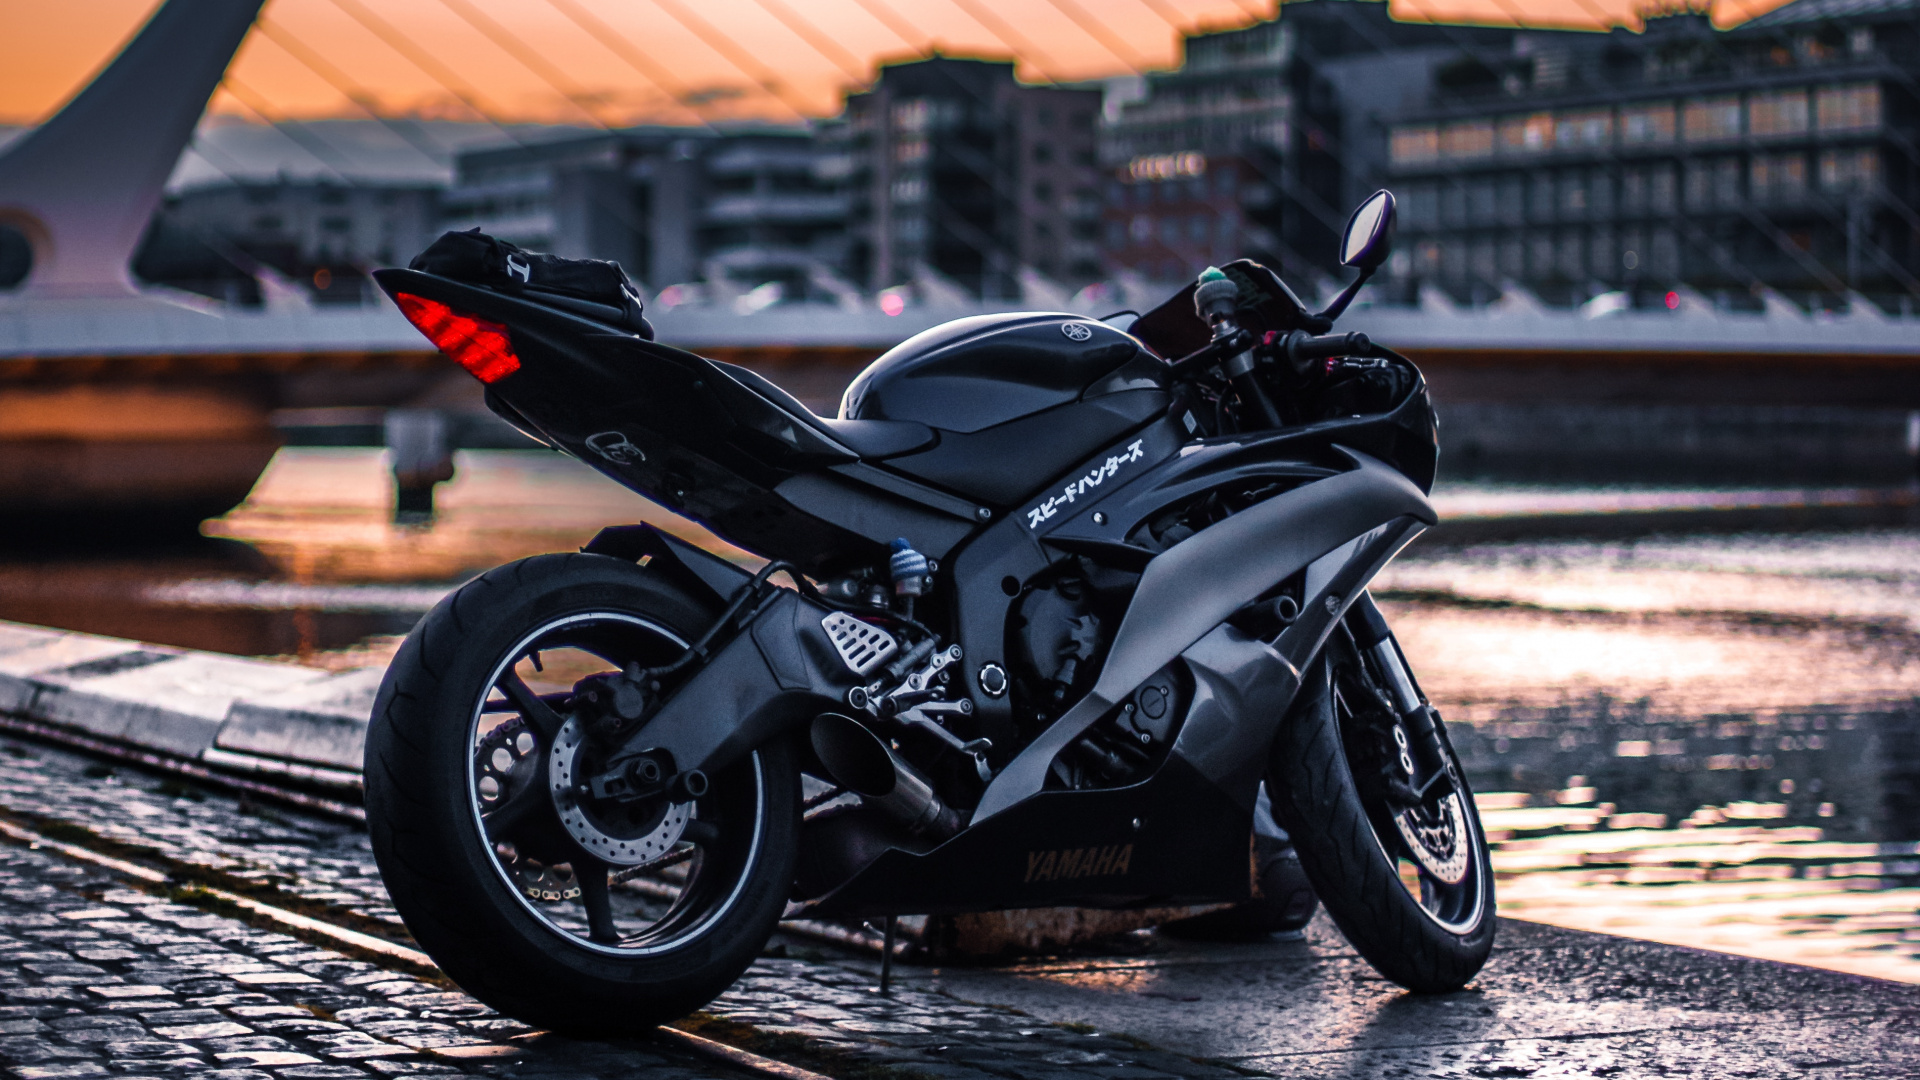 Black Sports Bike Parked on The Side of The Road. Wallpaper in 1920x1080 Resolution